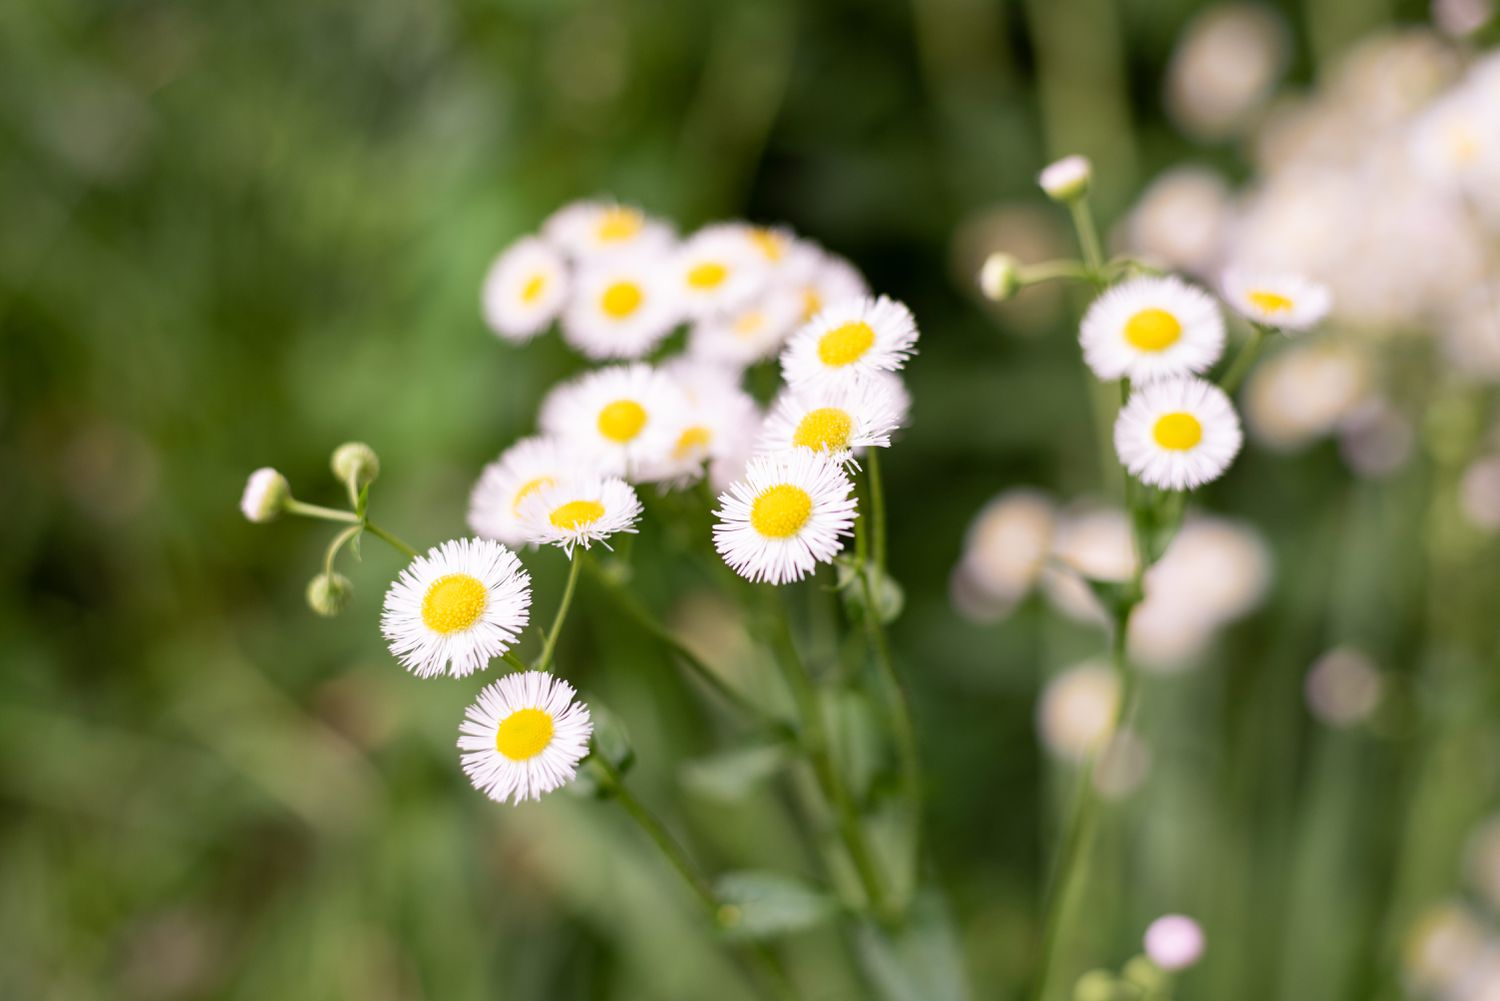 Mexican fleabane with small white flowers with yellow centers and buds on stems